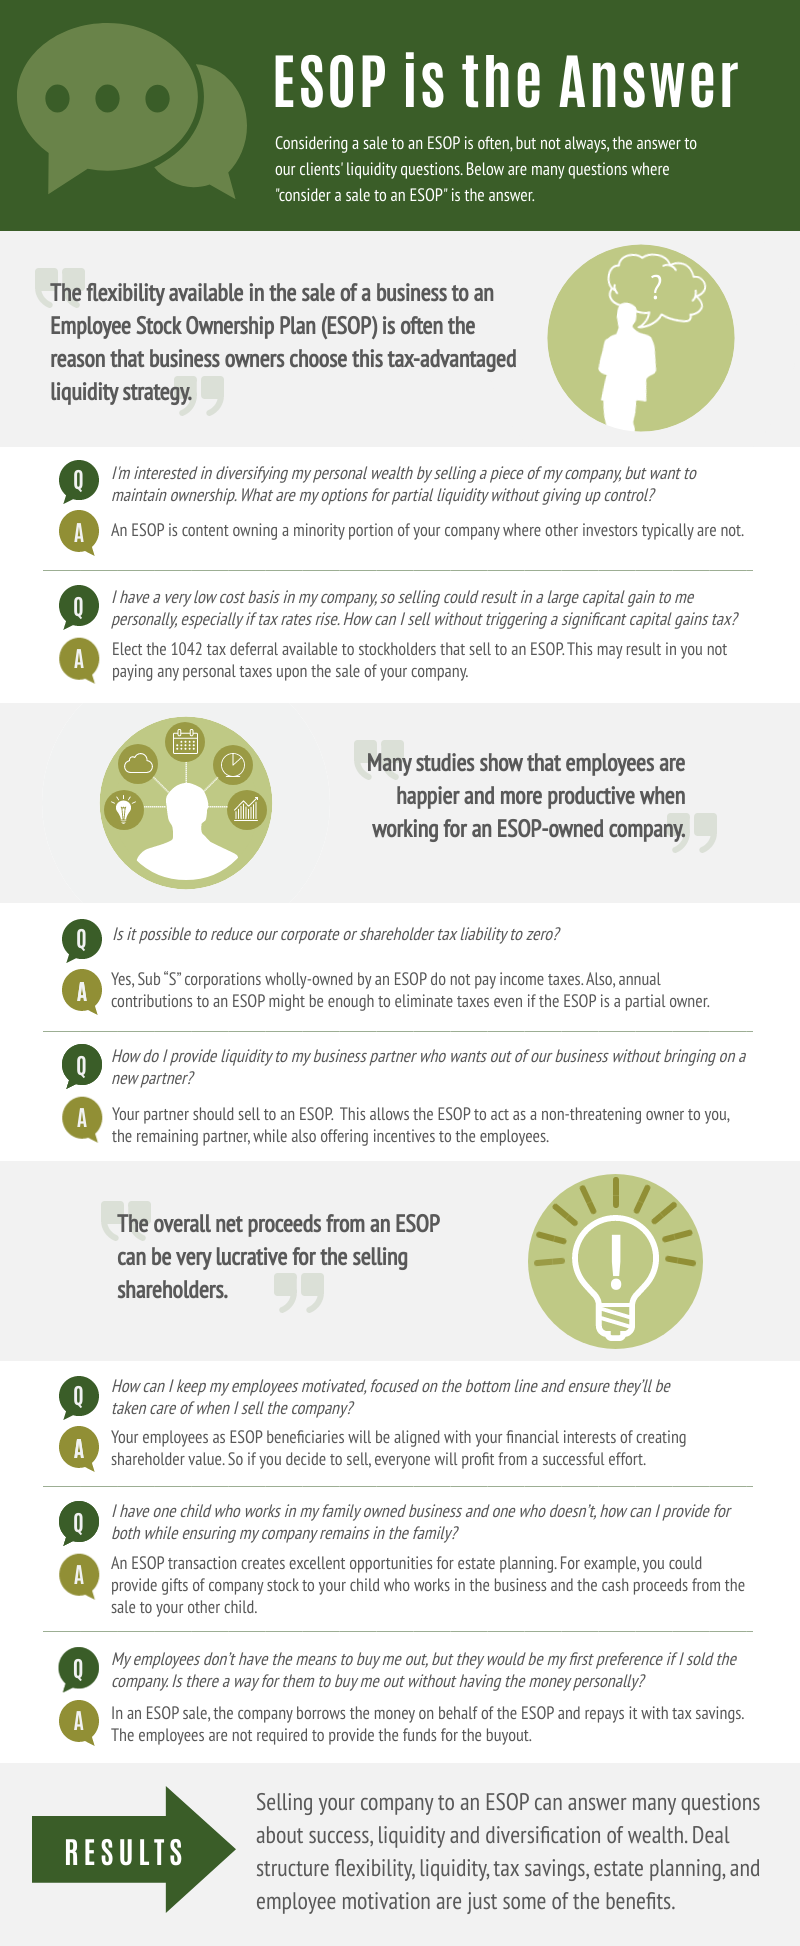 ESOP is the Answer